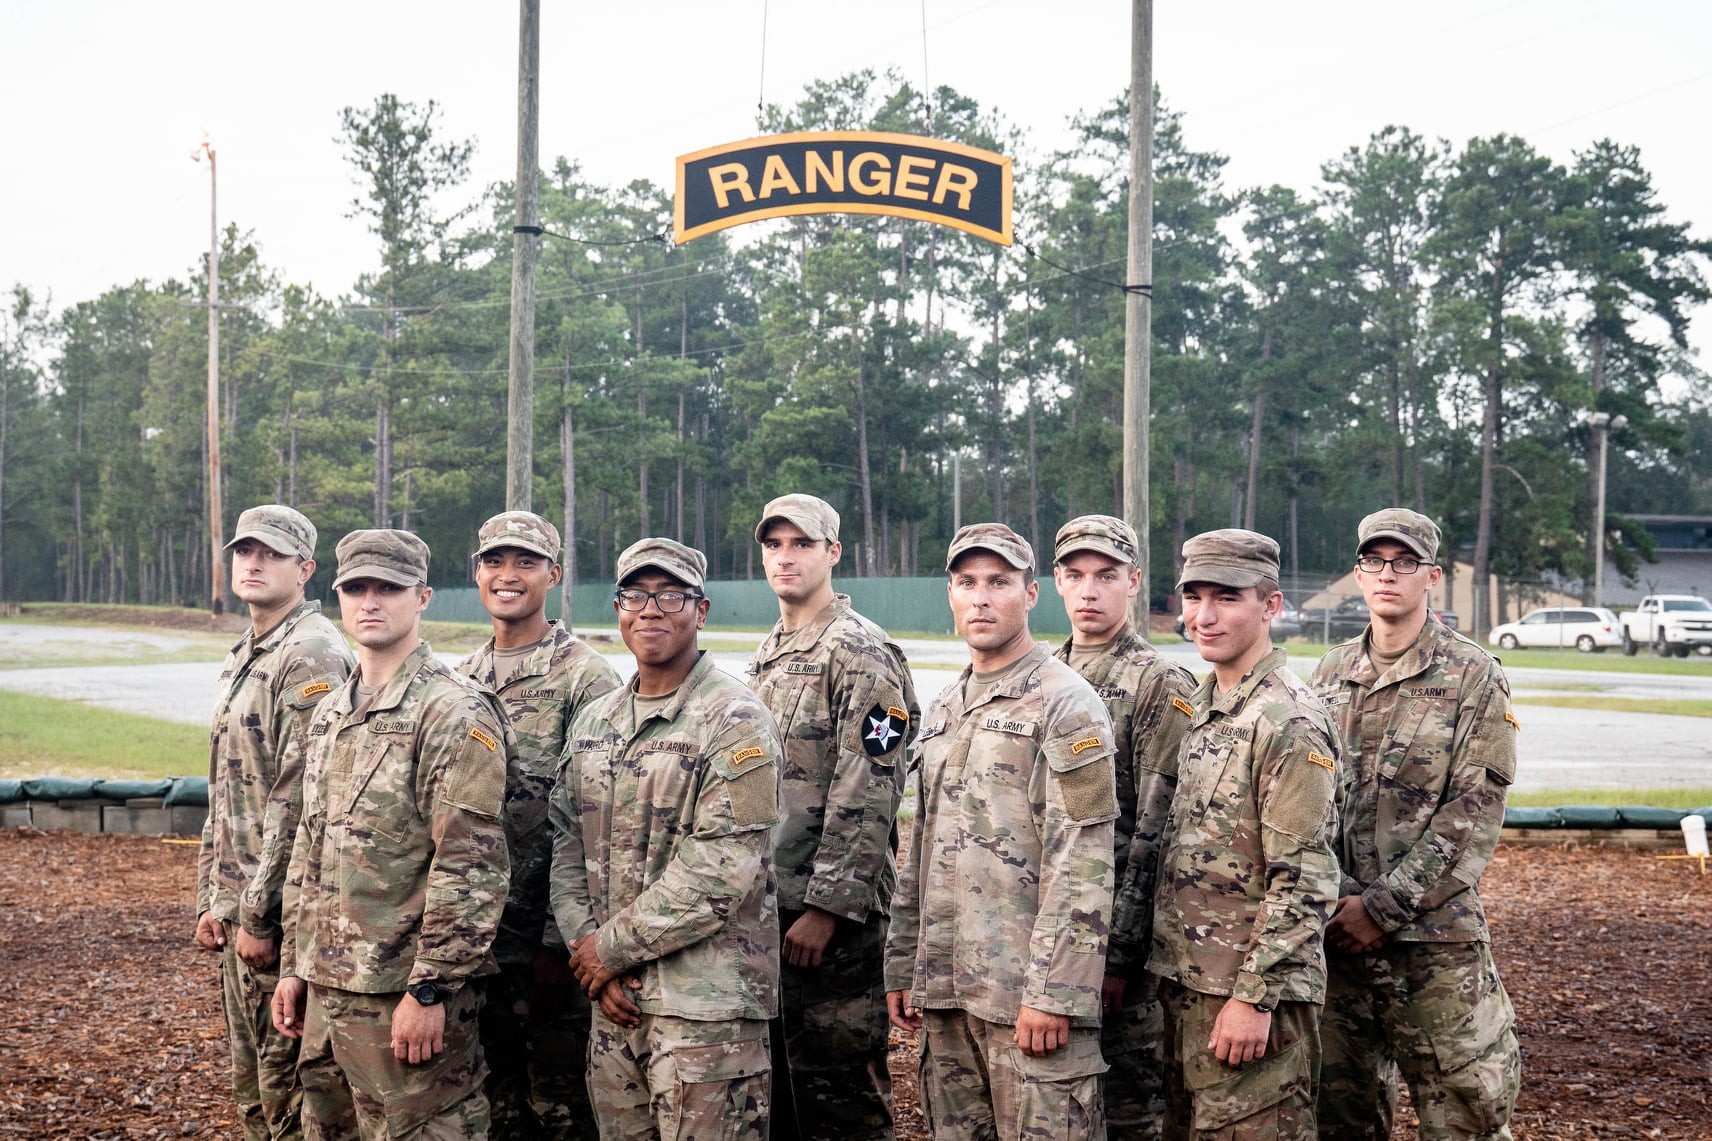 Recruits Rangers in Army Guard training program Article The